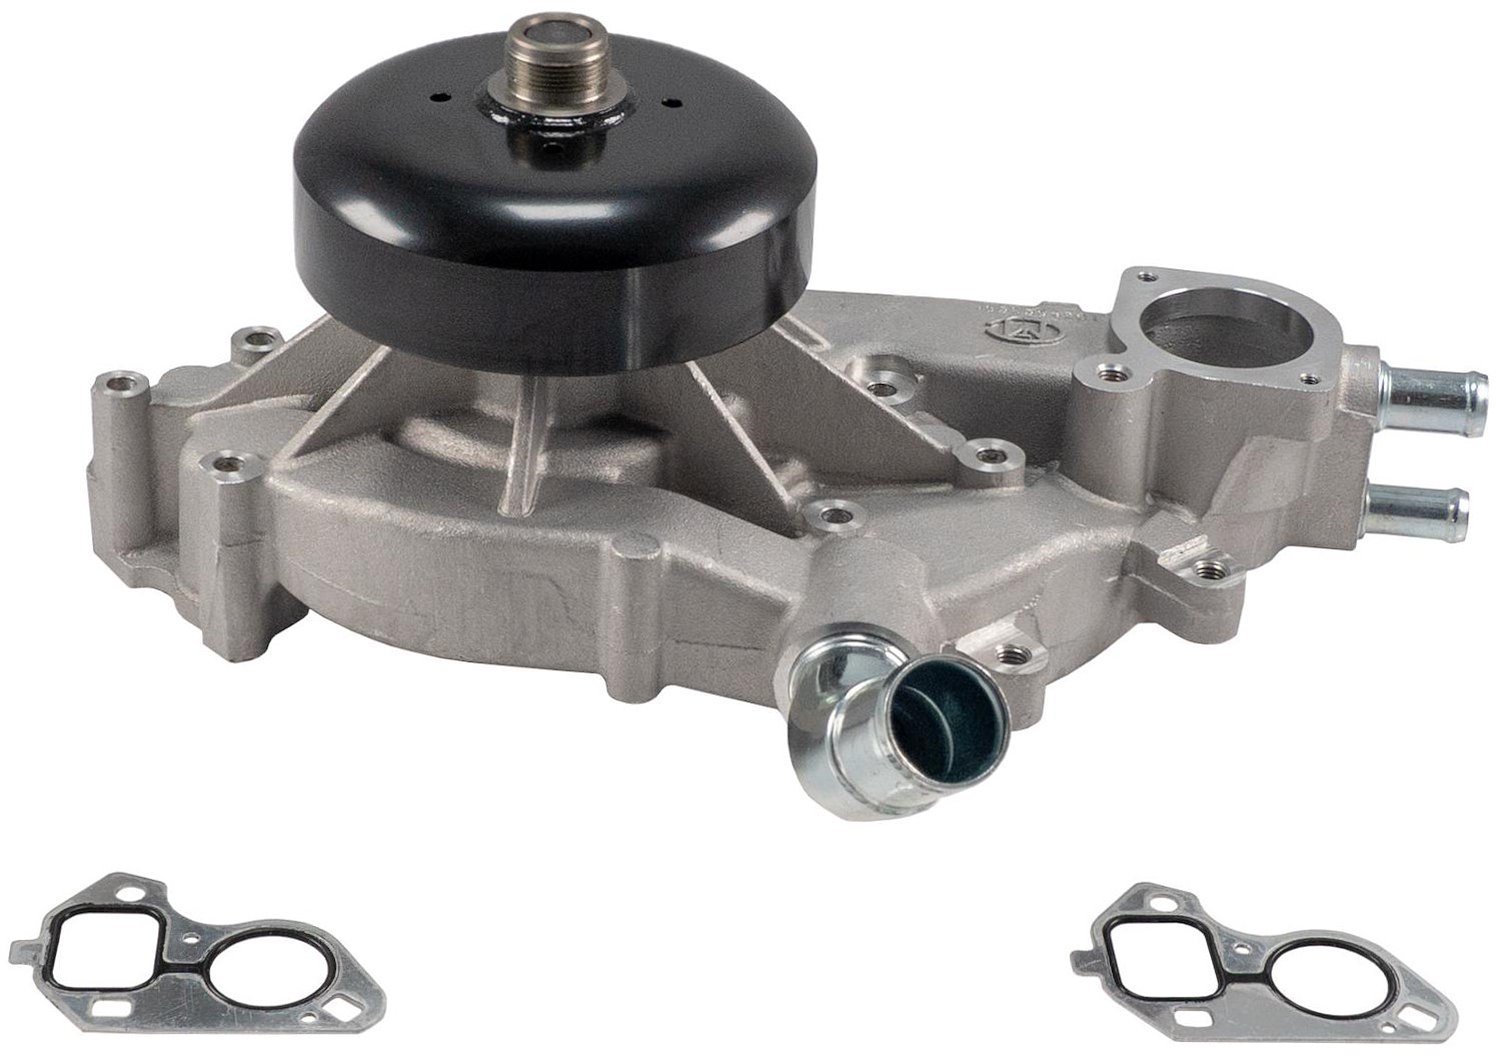 Water Pump Fits Select 1999-2011 GM Truck/SUV LS 4.8/5.3/6.0L Engines